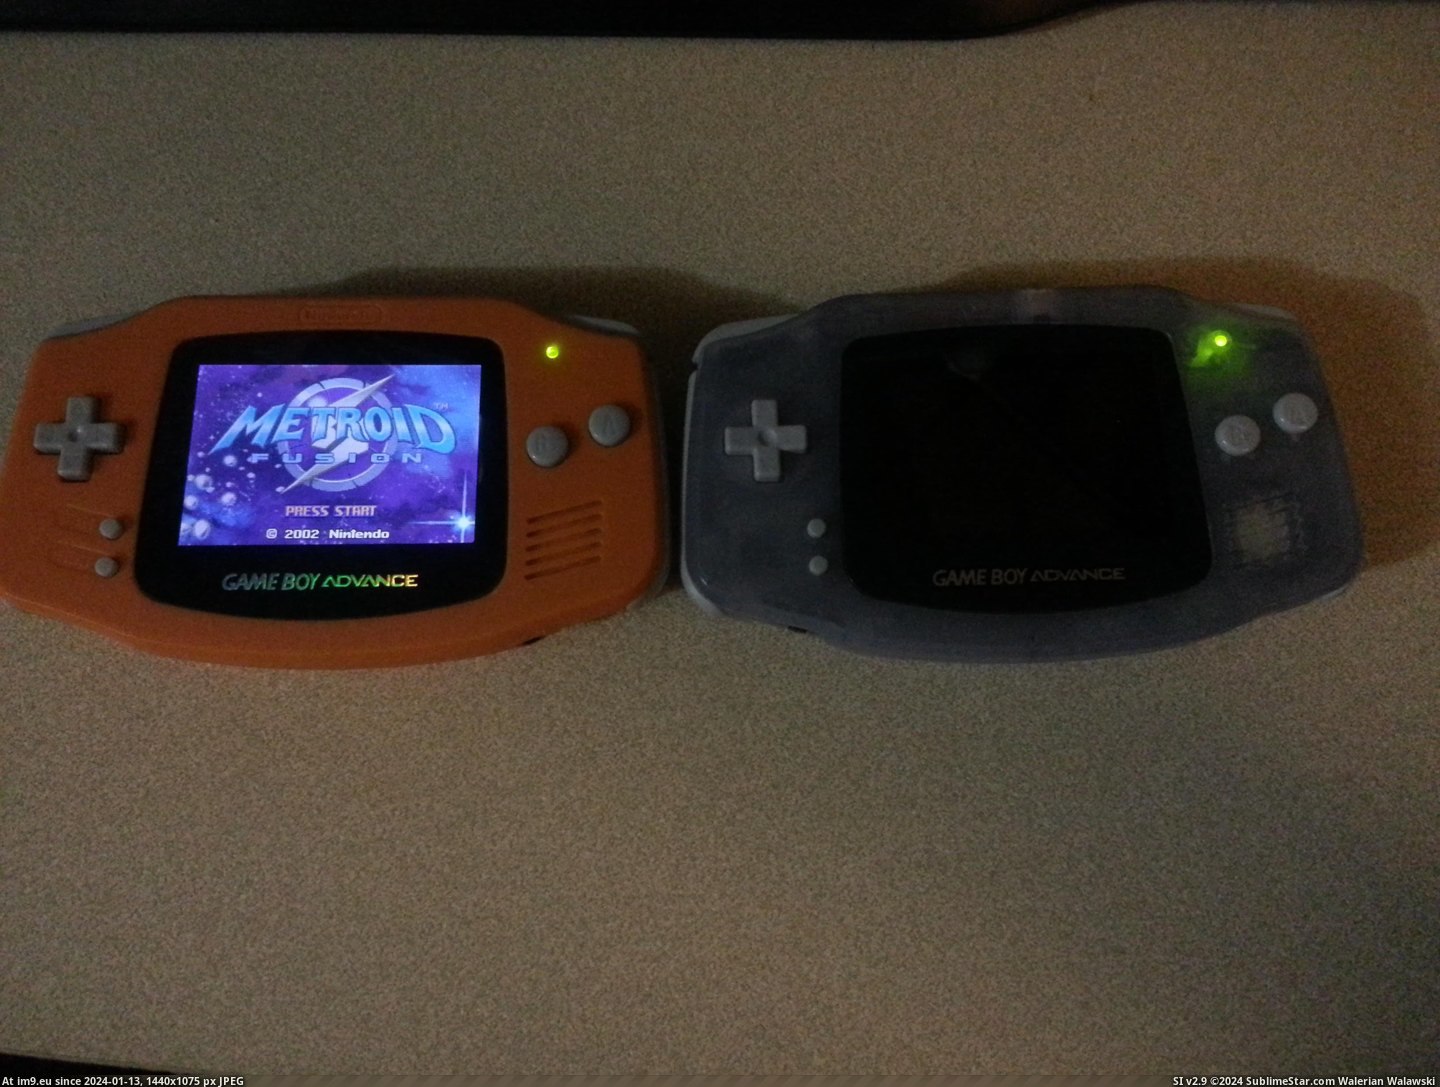 #Gaming #Happy #Finally #Kit #Gba #Backlight #Results #Received #Mod [Gaming] Finally received my GBA Backlight mod kit. So happy with the results! Pic. (Image of album My r/GAMING favs))